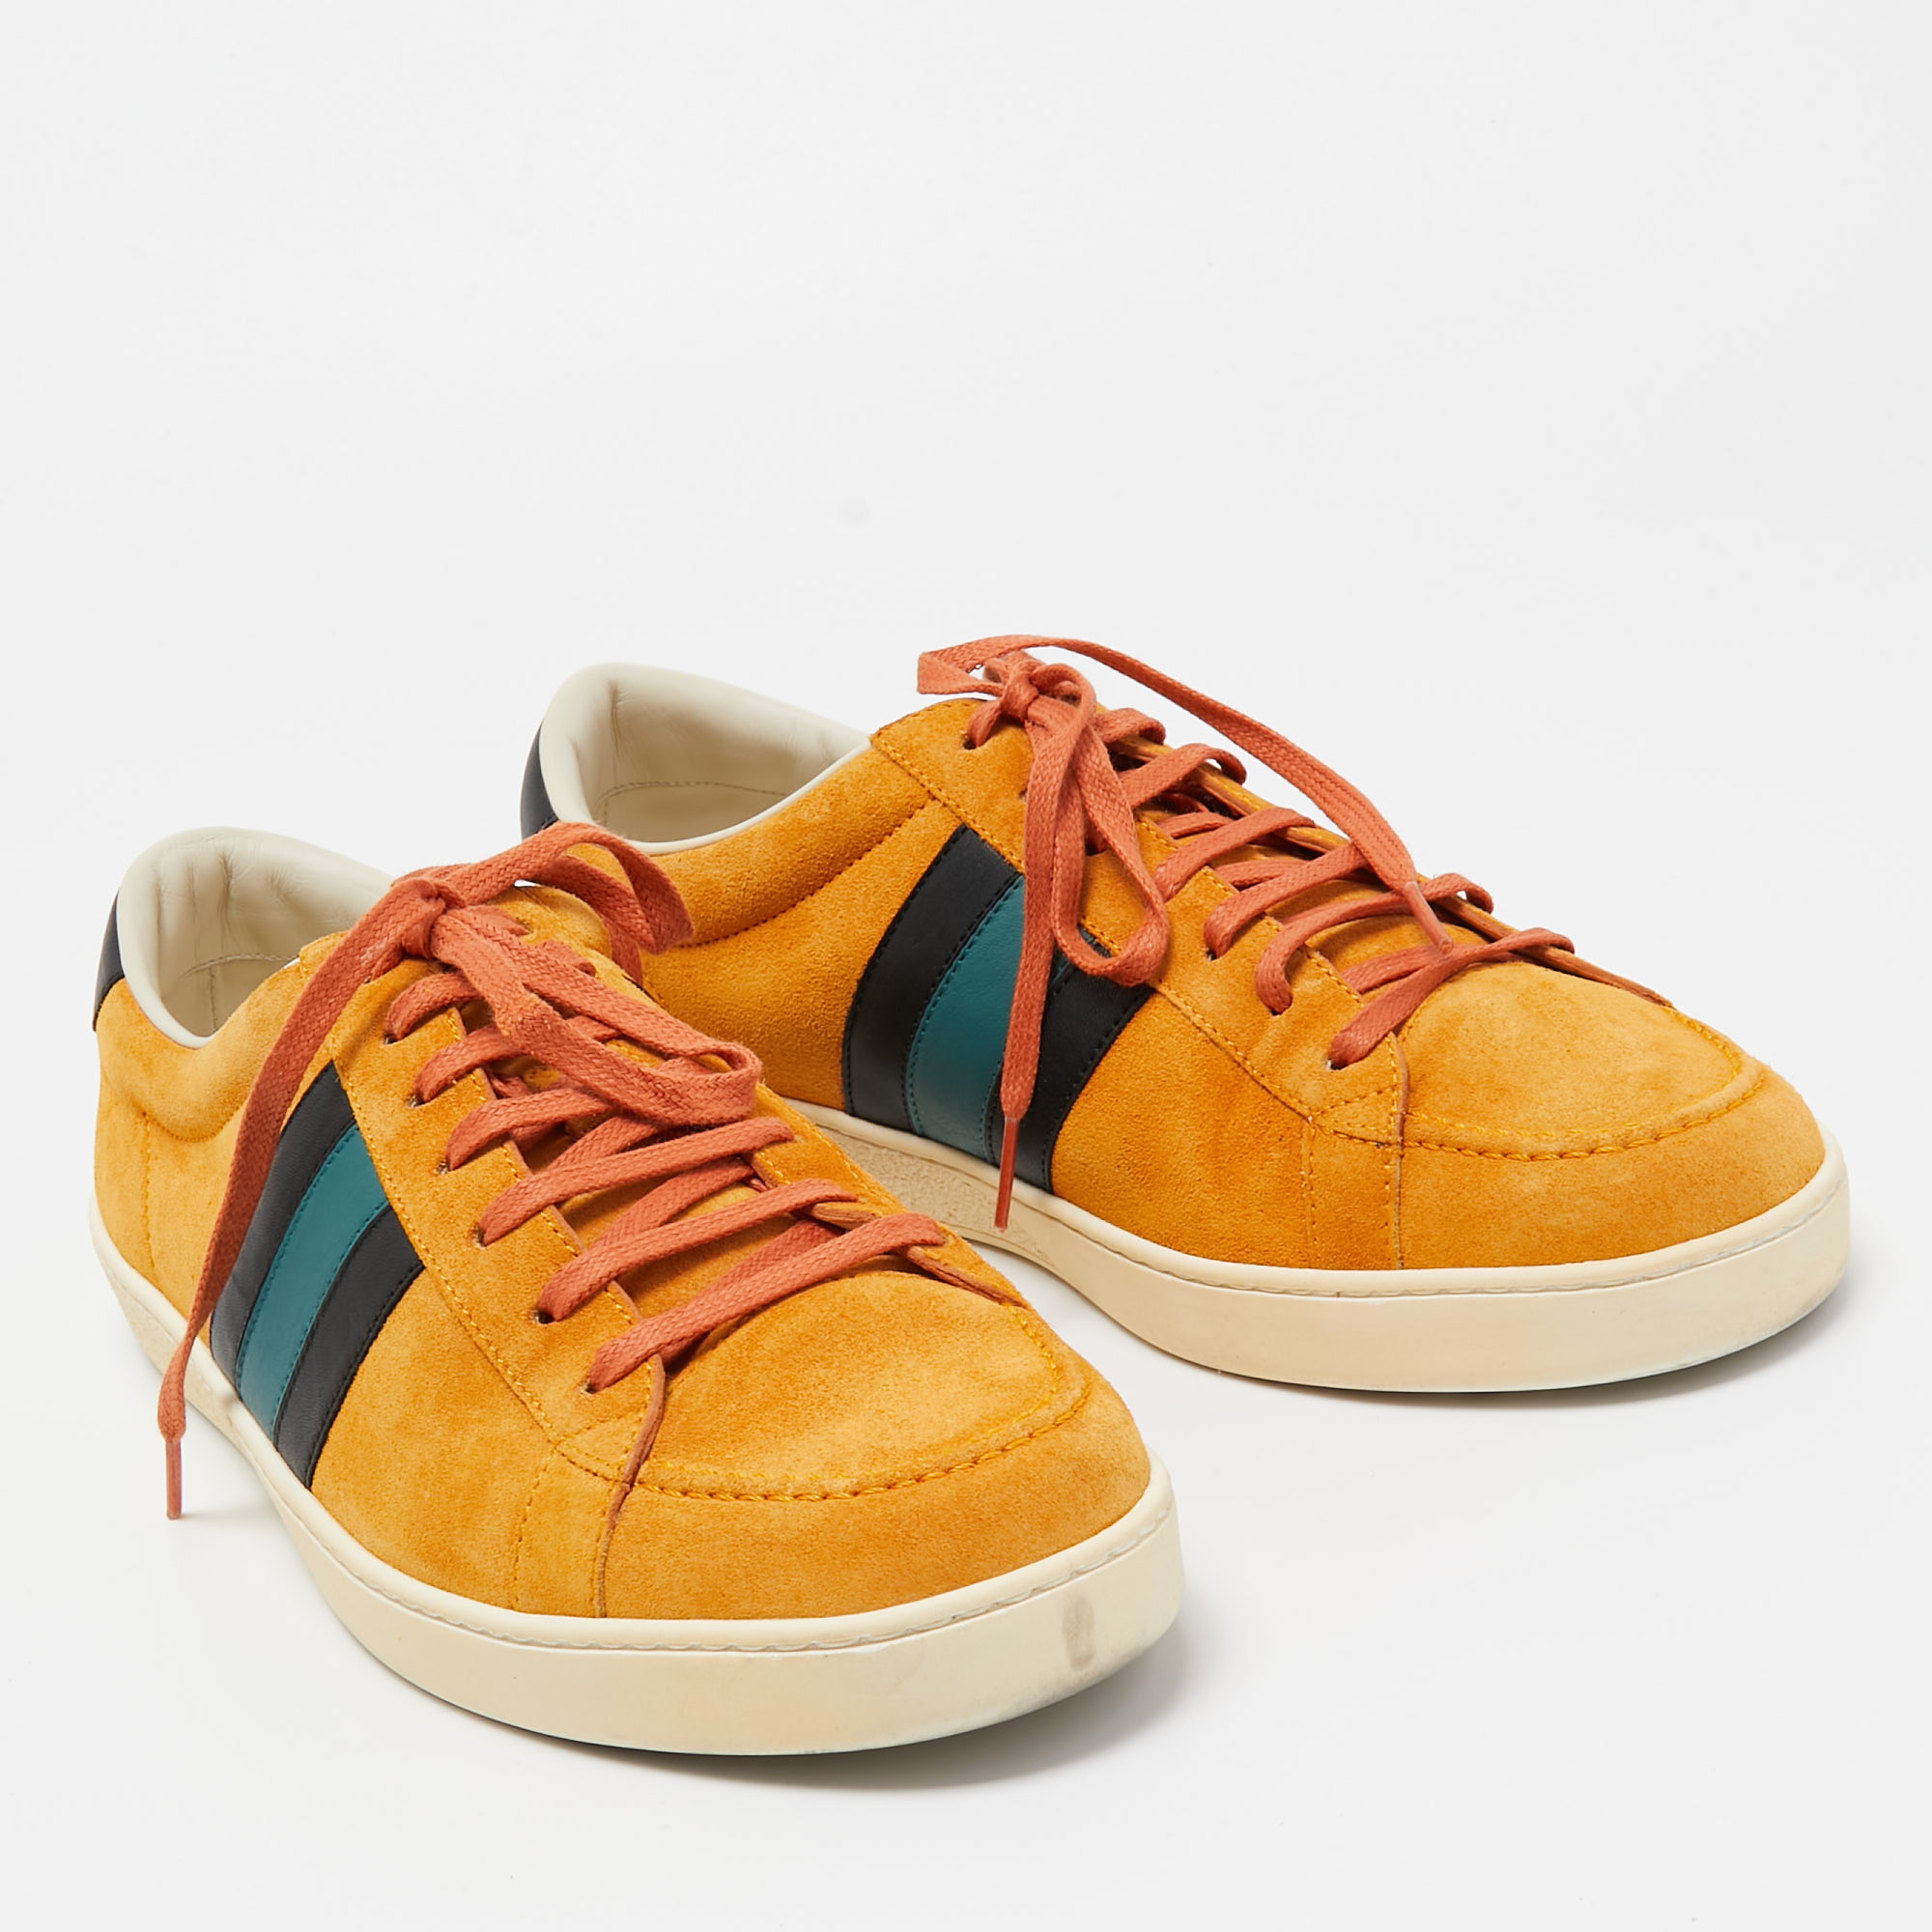 Gucci Mustard Suede Web Low Top Sneakers Size 42.5